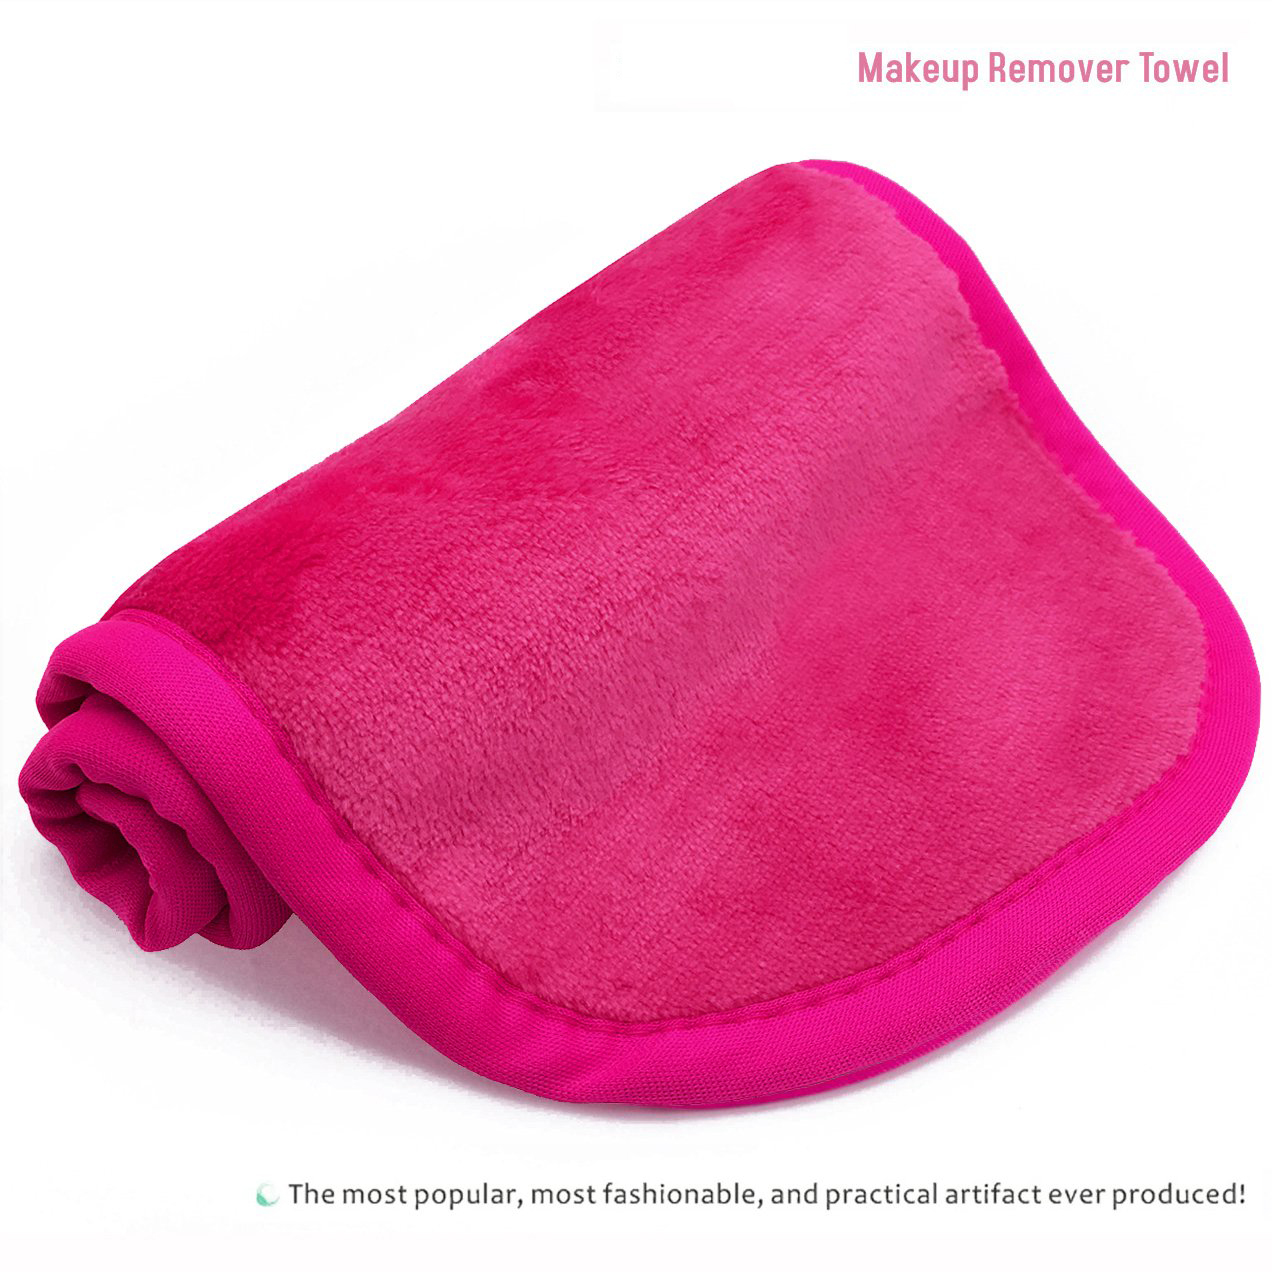 [ Makeup Remover Cloth ] [ Reusable Microfiber Facial Cleansing Towel ] [ Remove Makeup Instantly with Just Water ]